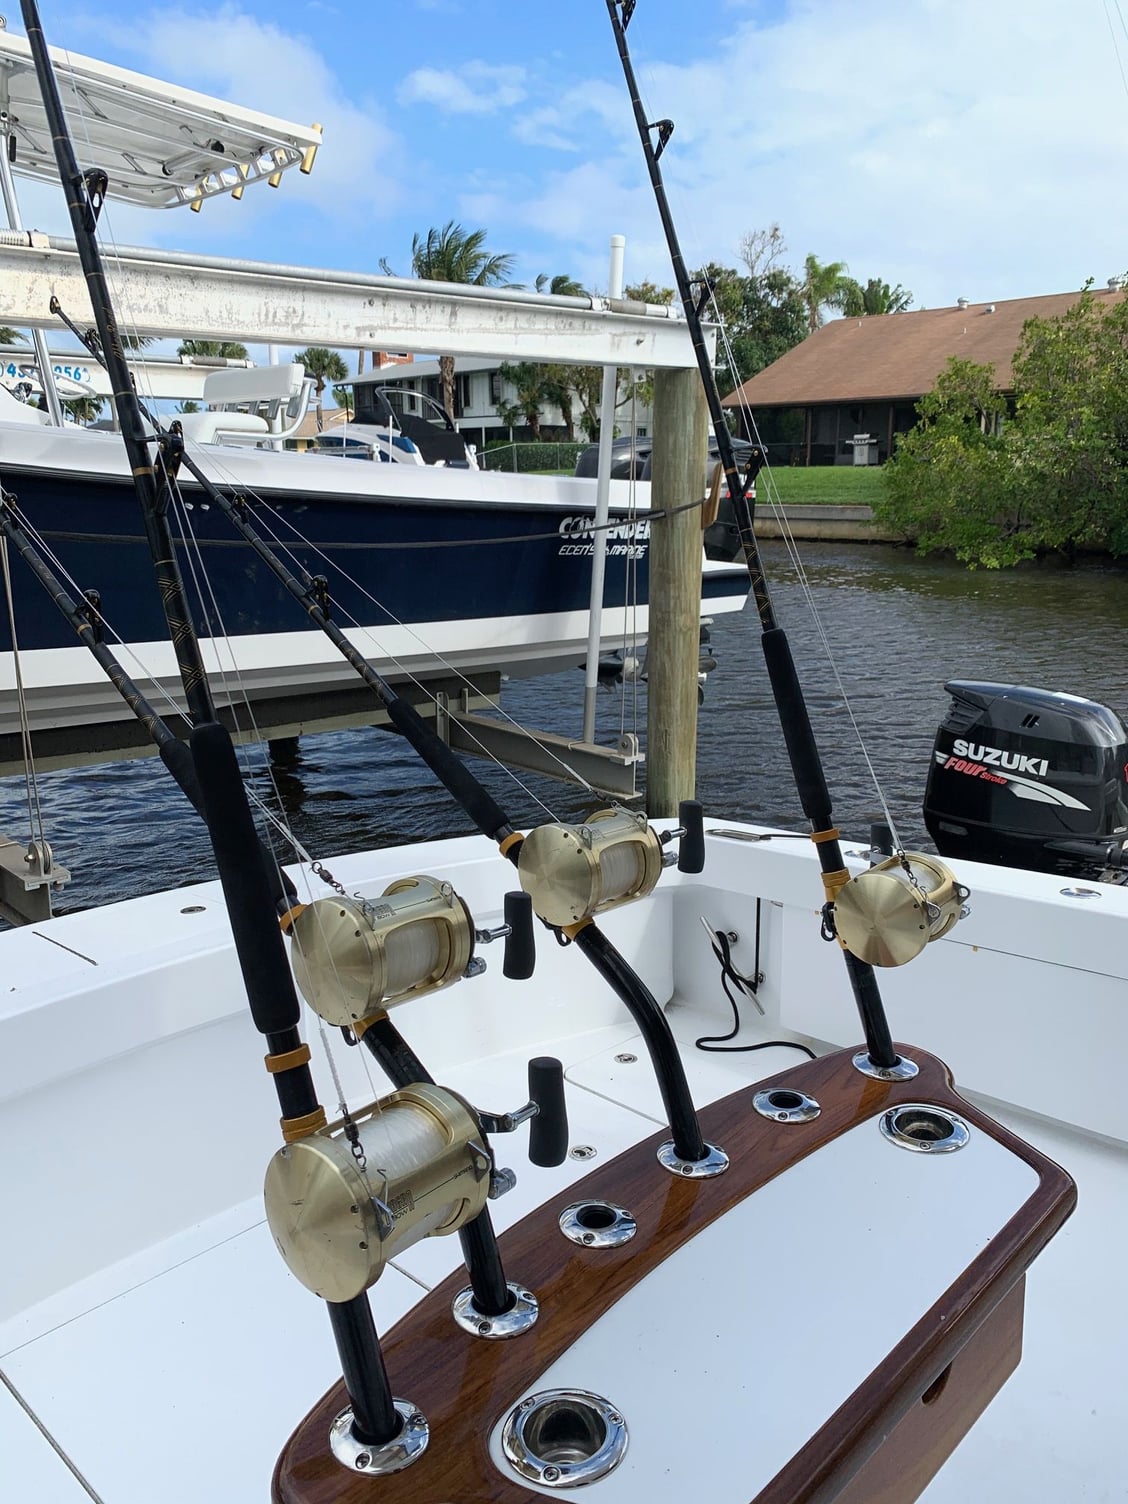 Shimano tiagra 80w Sold - The Hull Truth - Boating and Fishing Forum